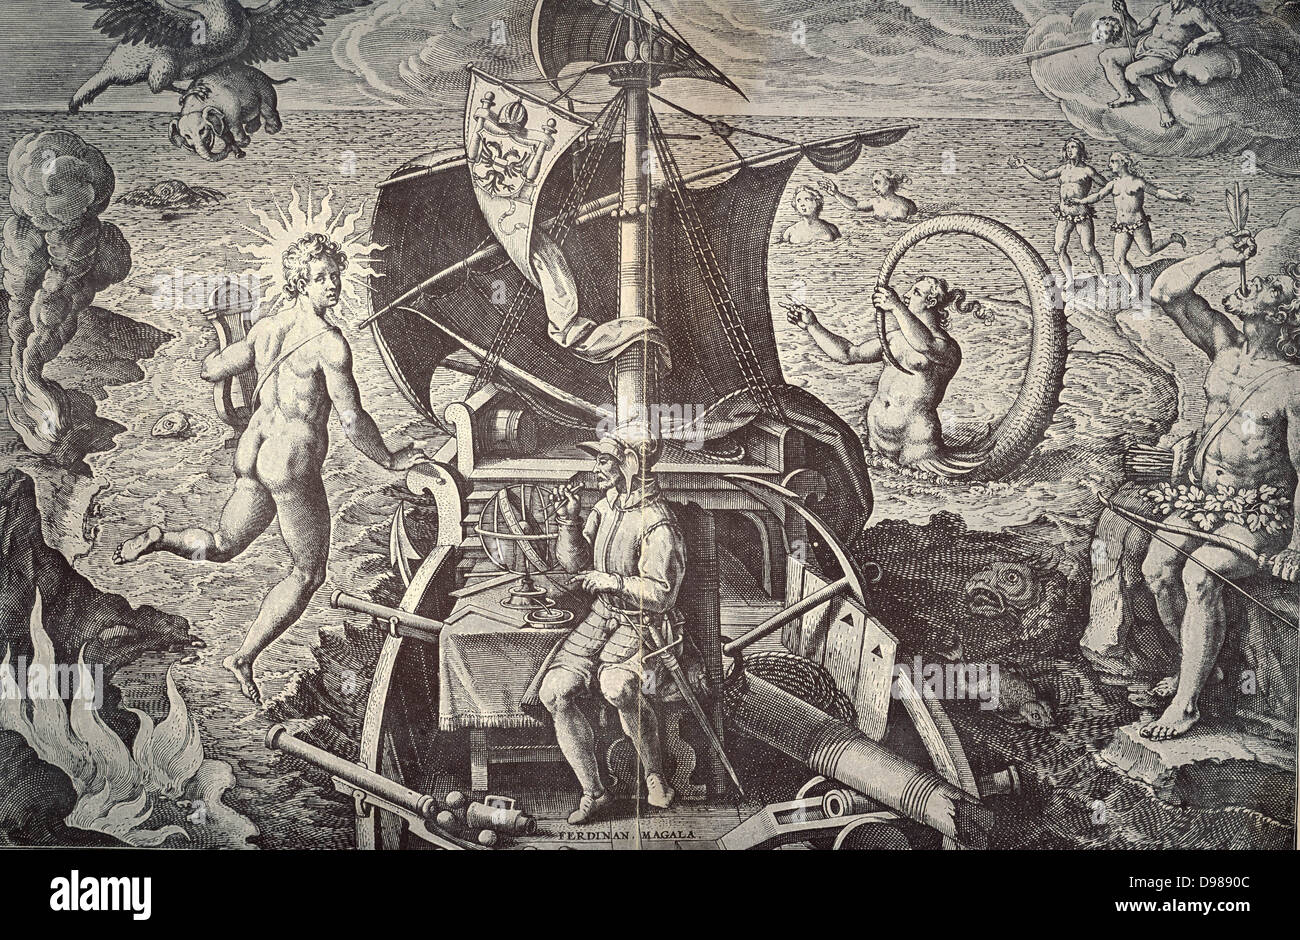 Ferdinand Magellan (c1480-1521) on his ship 'Victoria'. Allegorical celebration of the first voyage of circumnavigation (1519-1522) led by Magellan. He was killed by natives in the Philippines and the 'Victoria' was taken back to Spain by the last surviving captain in the expedition. Engraving after Stradanus, 1522. Stock Photo